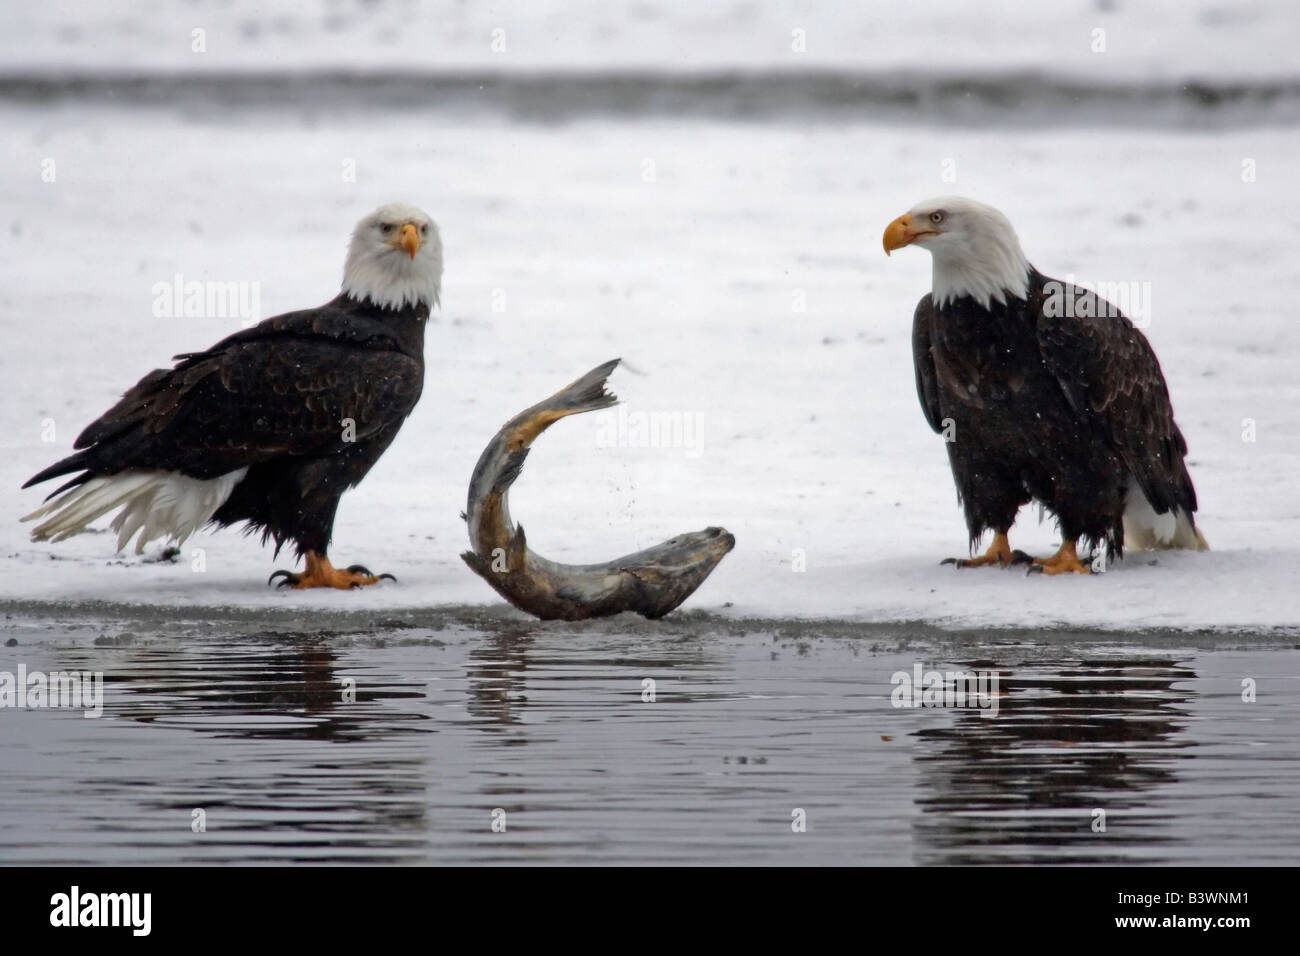 USA, Alaska, Chilkat Bald Eagle Preserve. Pair of bald eagles waiting to feed on almost dead salmon. Stock Photo